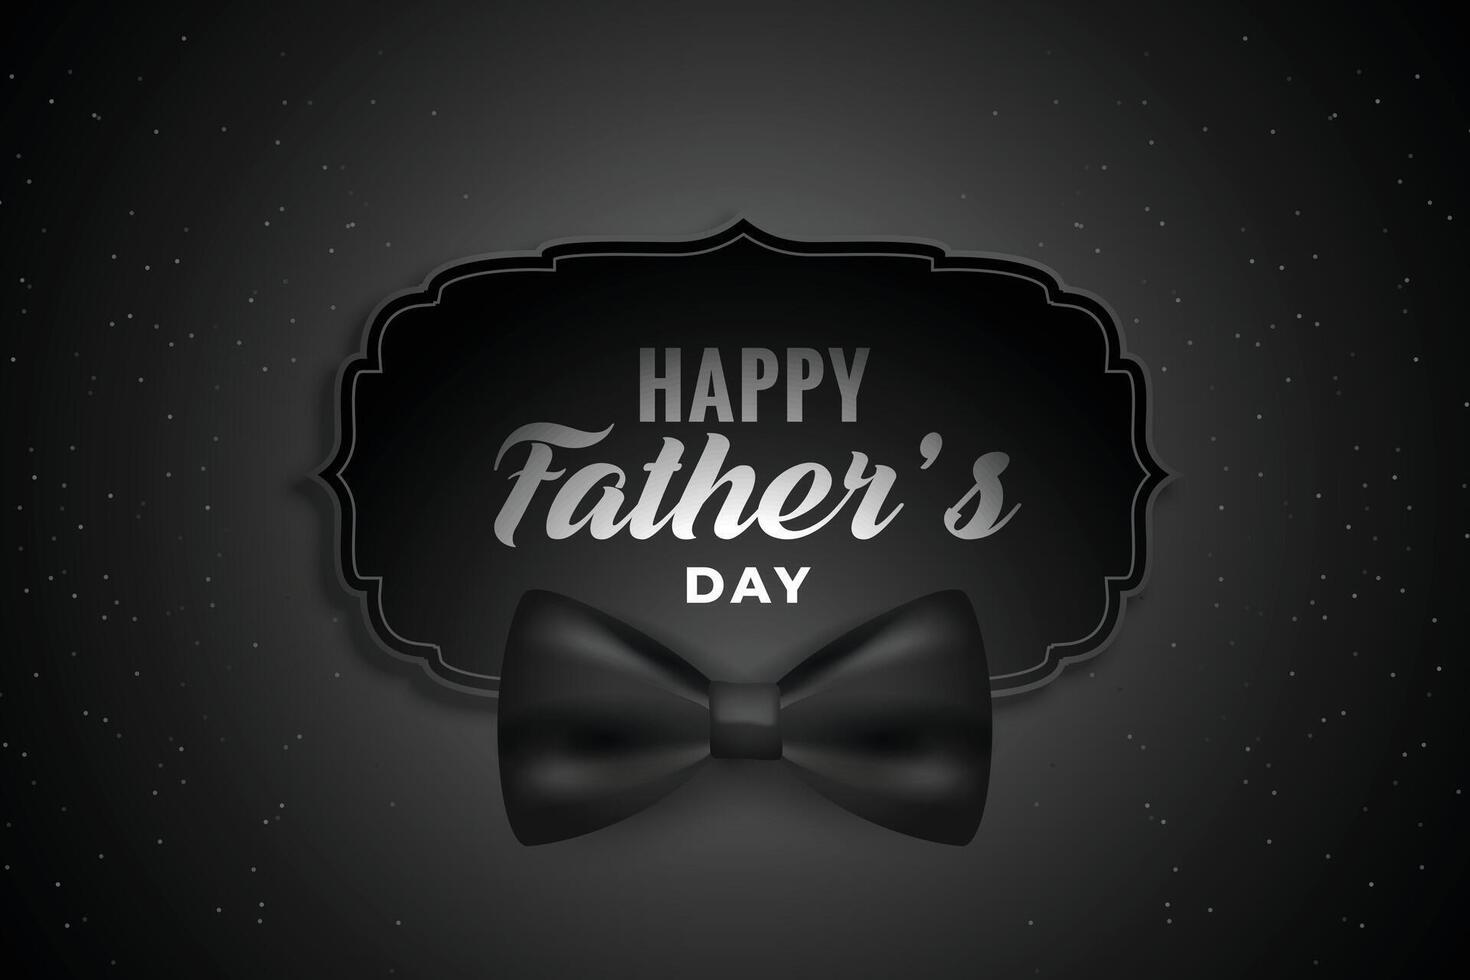 happy fathers day black background with realistic bow vector